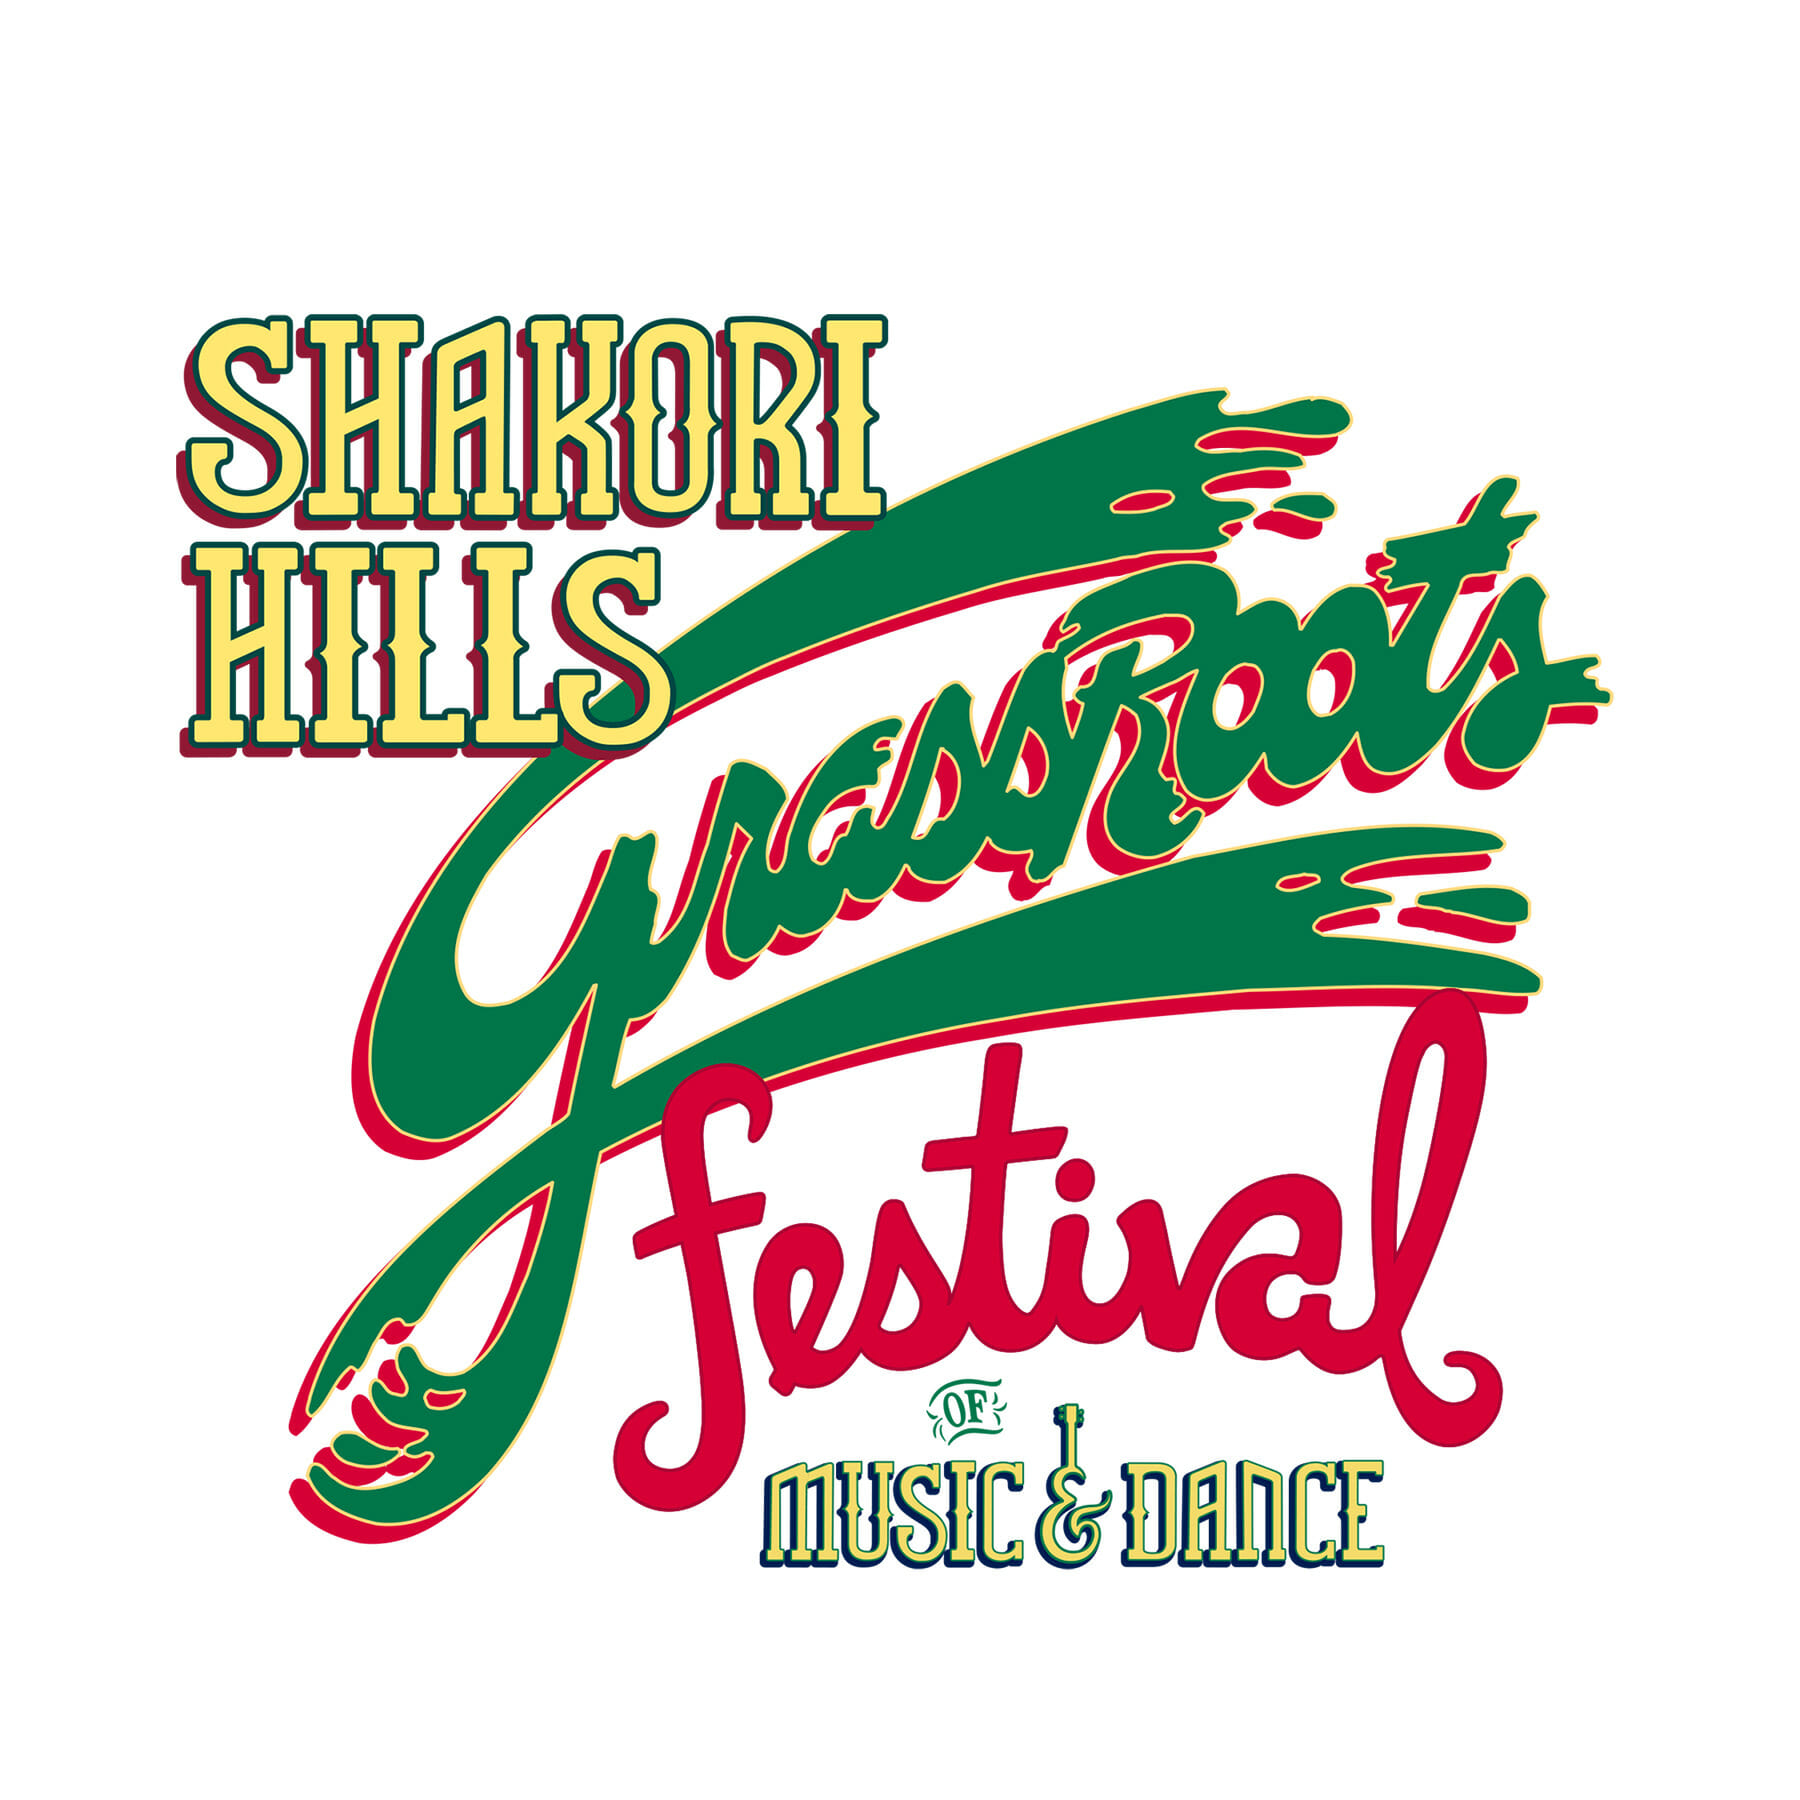 Shakori Hills Grassroots Festival of Music & Dance Unveil Initial Artist Lineup for 18th Annual Fall Event: Donna the Buffalo, Eric Krasno, Driftwood and More